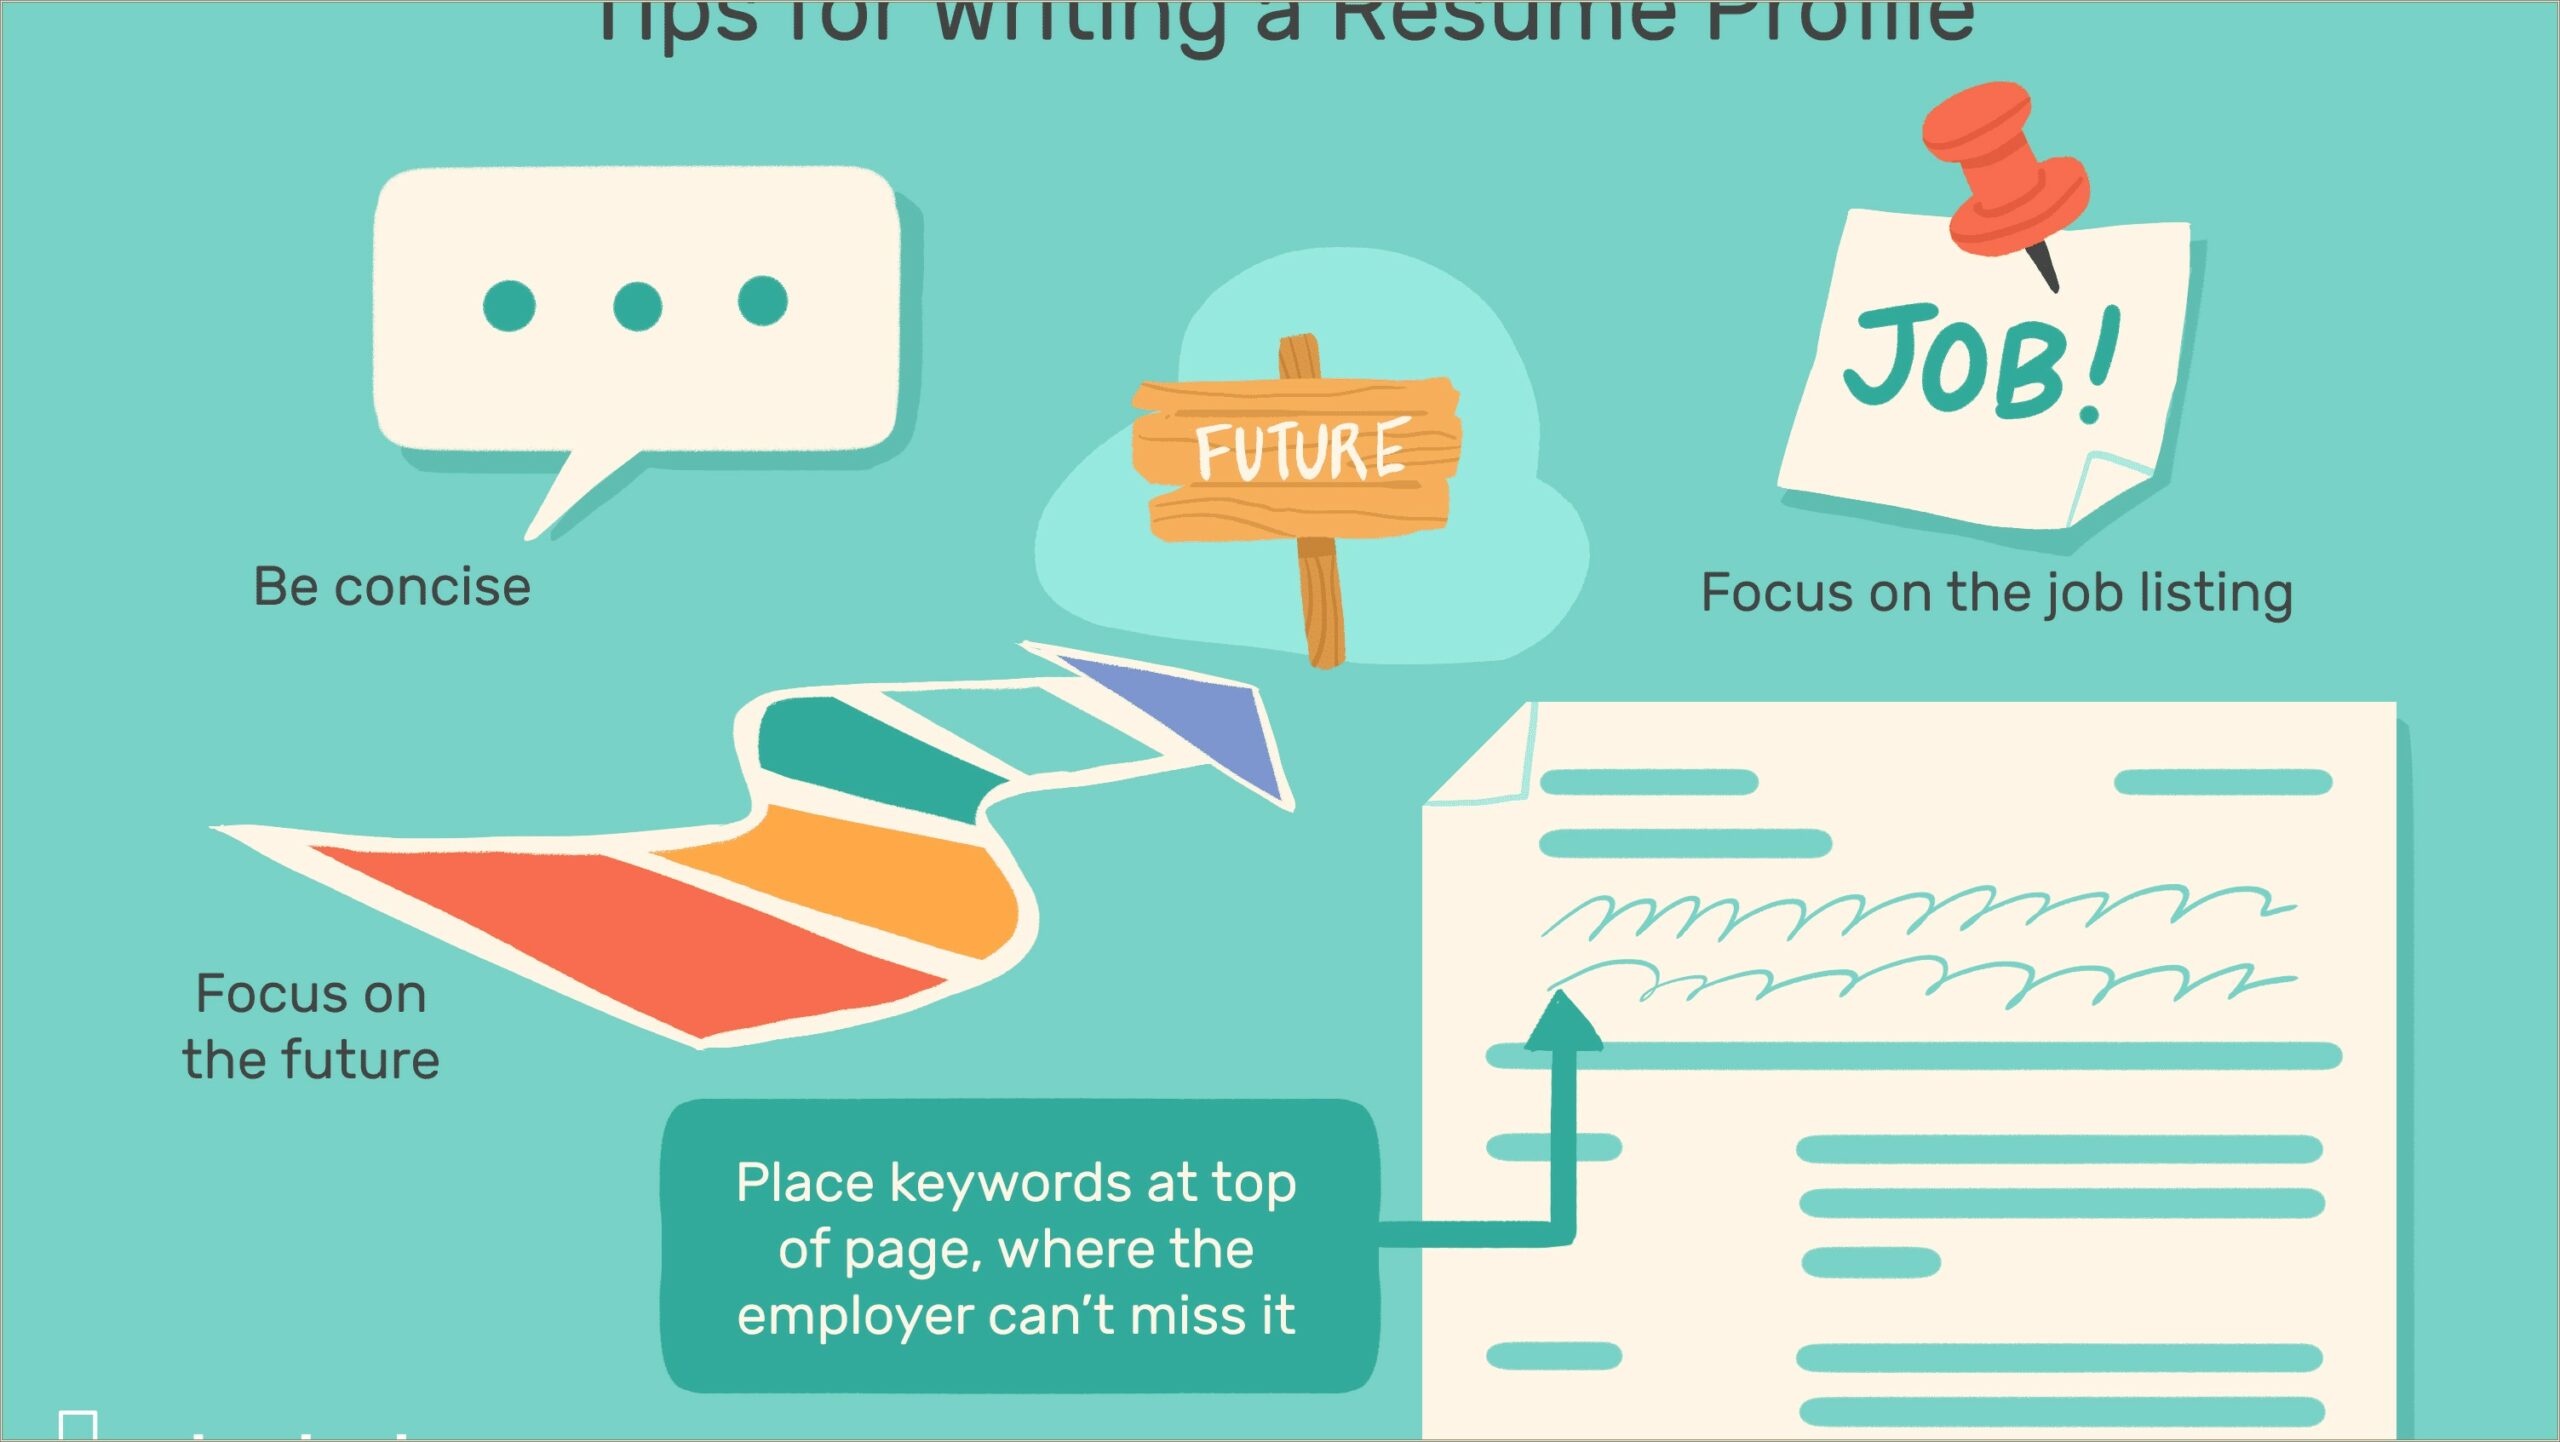 Words And Phrases To Include In Your Resume